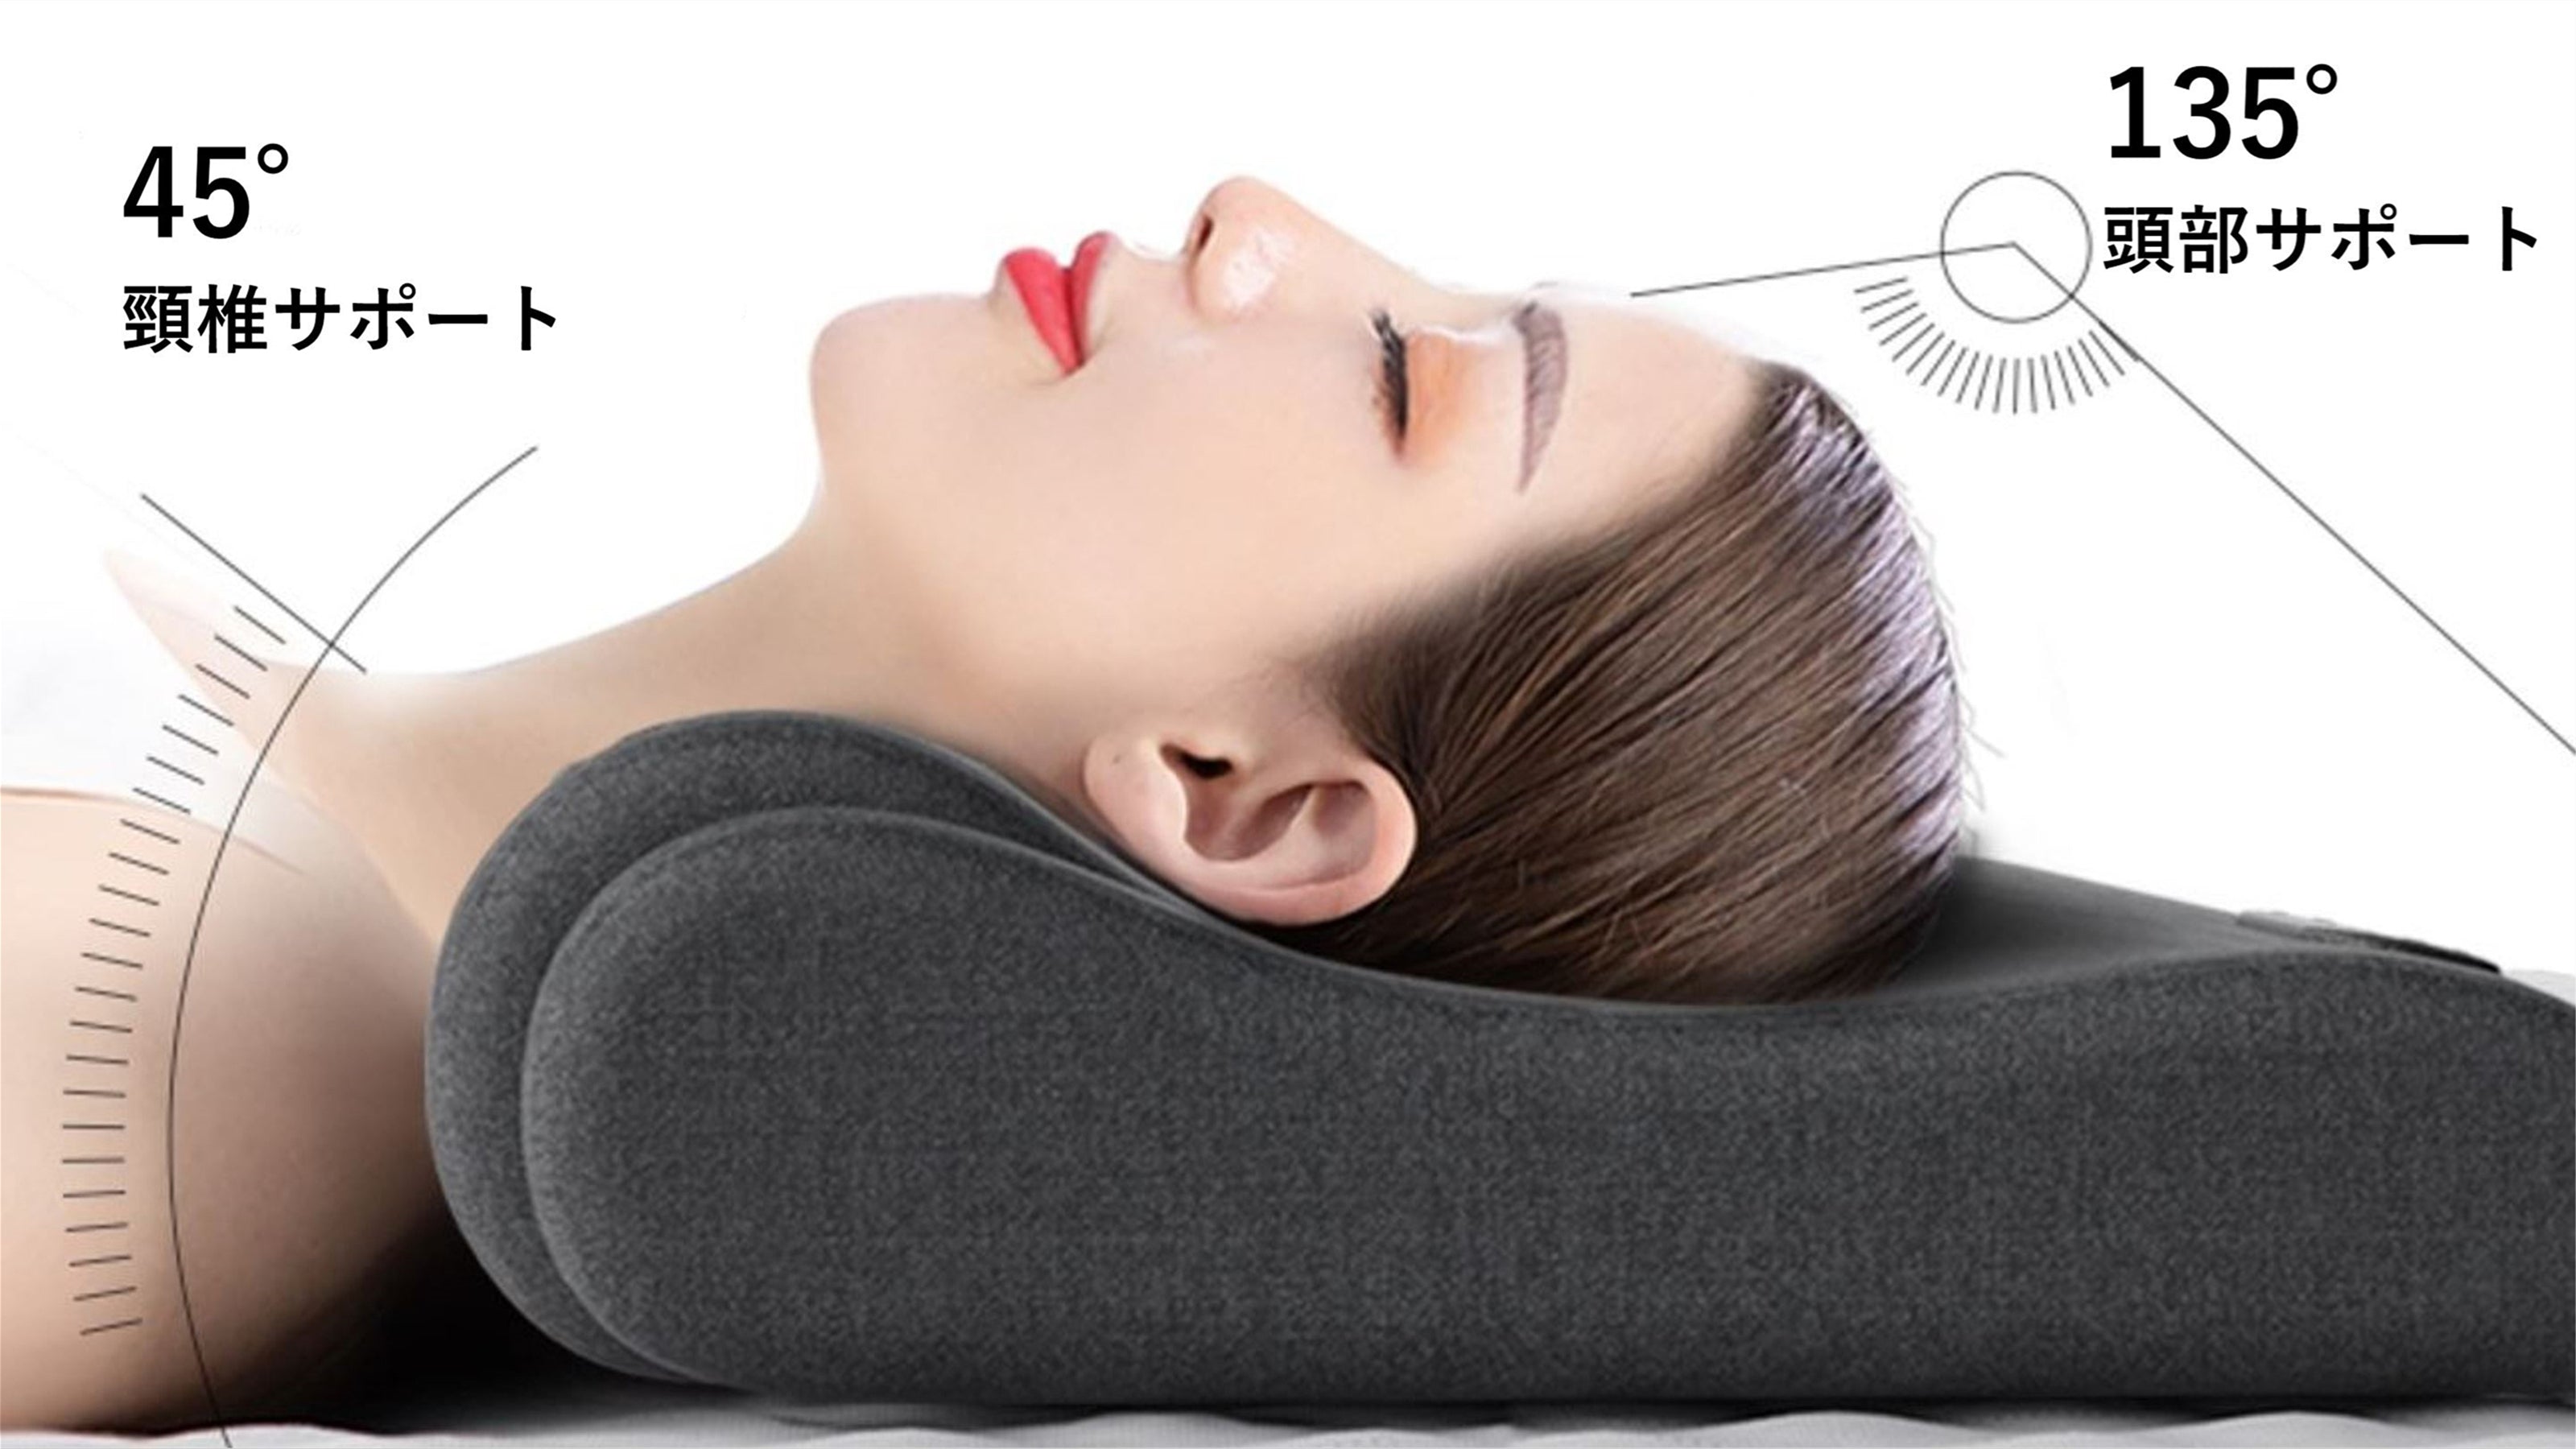 [Heat x Acupressure x Traction] ``Heating Massage Pillow'' that gently works on your neck just by sleeping